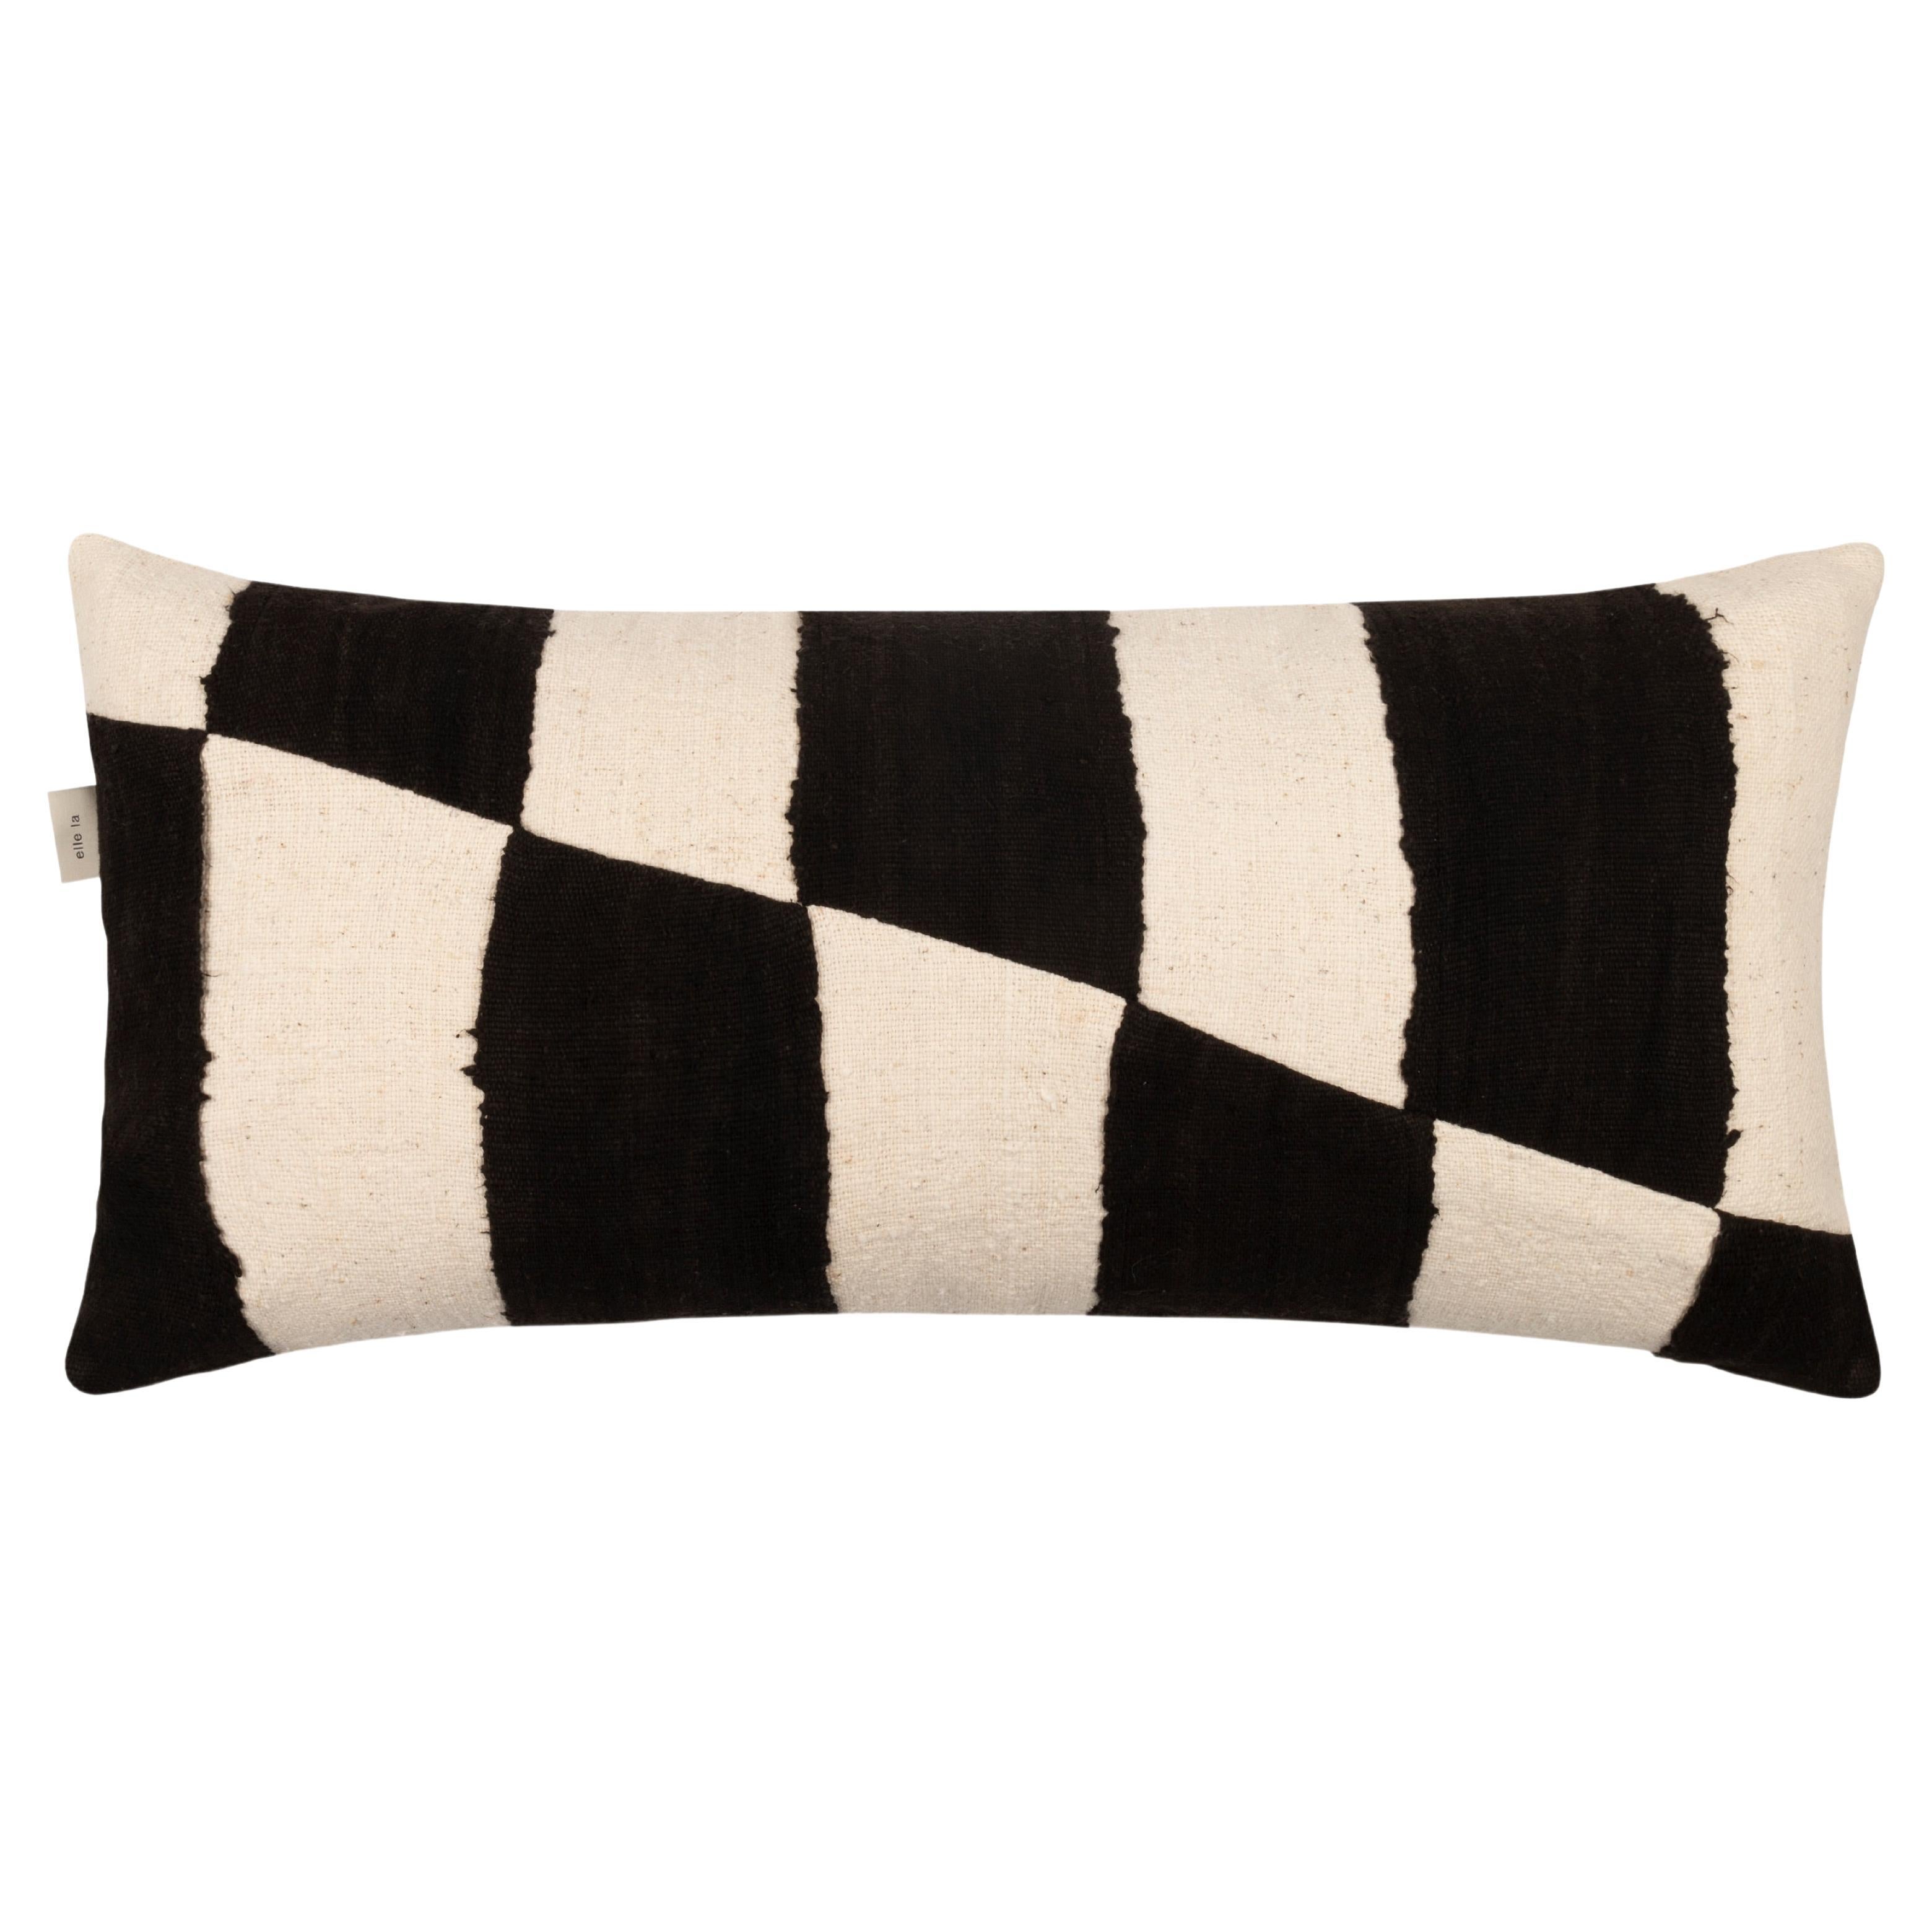 Contemporary Black & White Cushion Cover from Handwoven Malian Cotton Fabrics For Sale